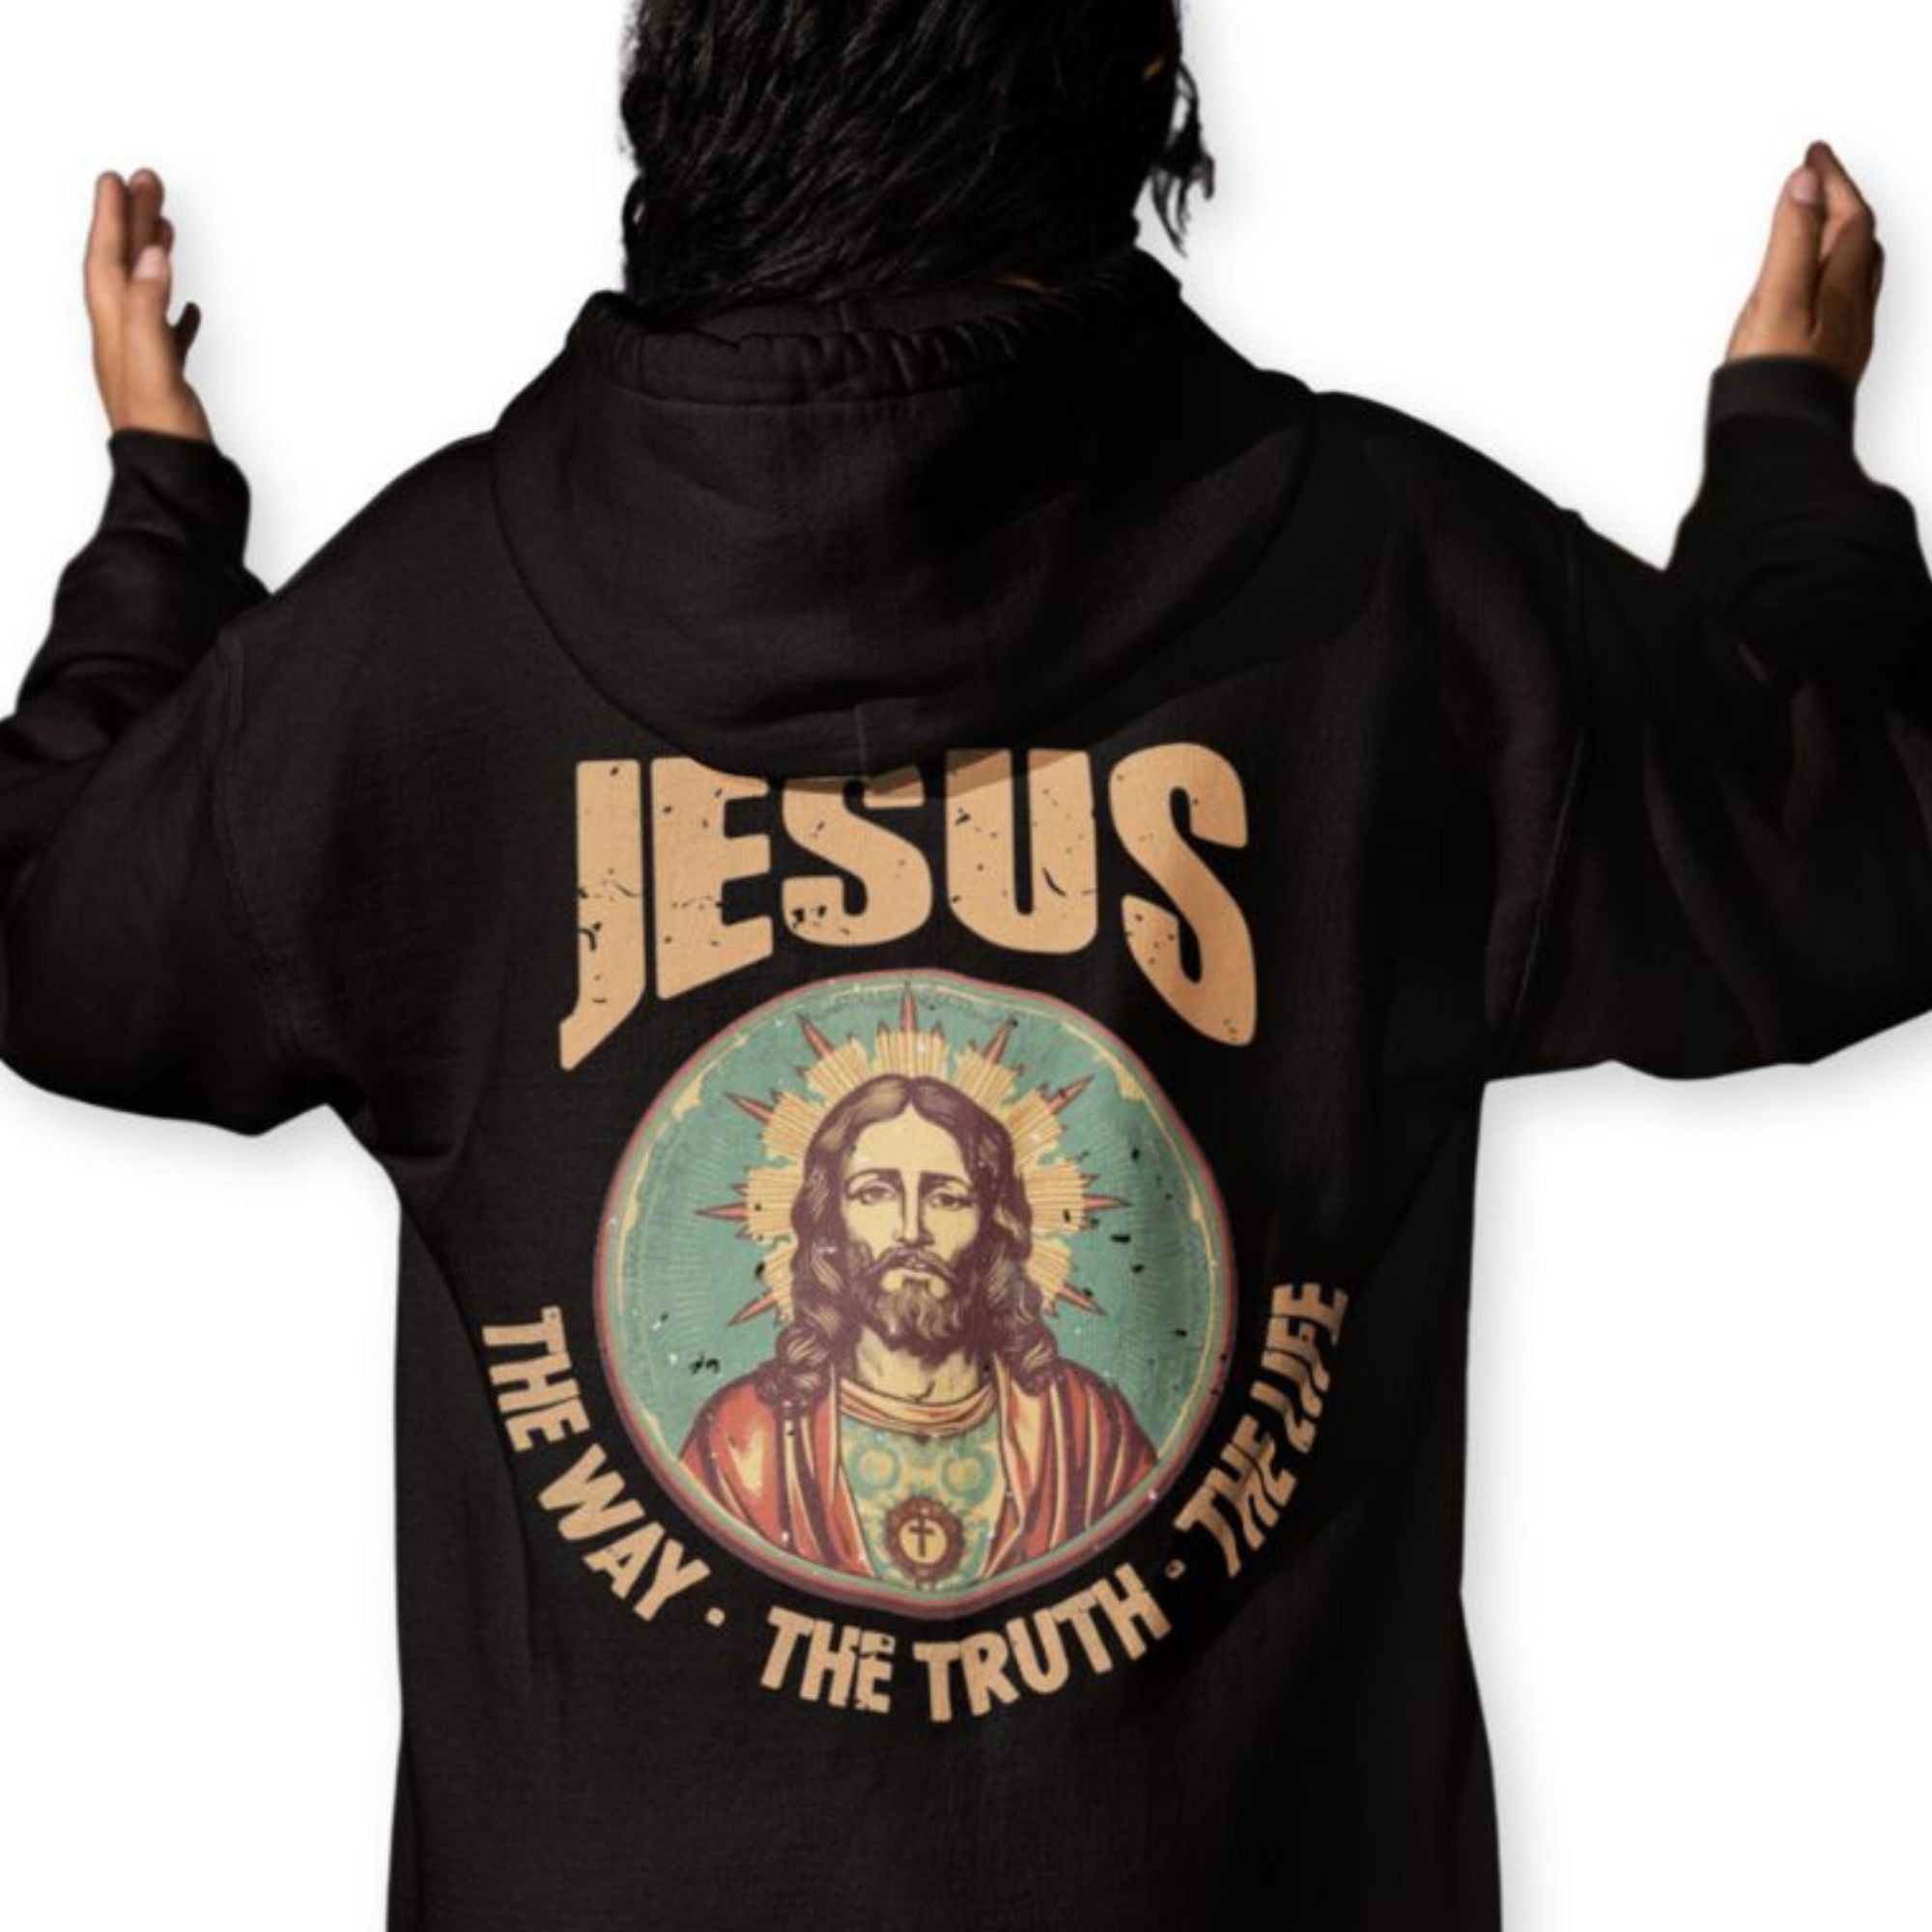 Jesus - The Way, Truth, Life Retro-Inspired Women's Jacket Heavy Blend™ Full Zip Hooded Sweatshirt Size: S Color: Red Jesus Passion Apparel